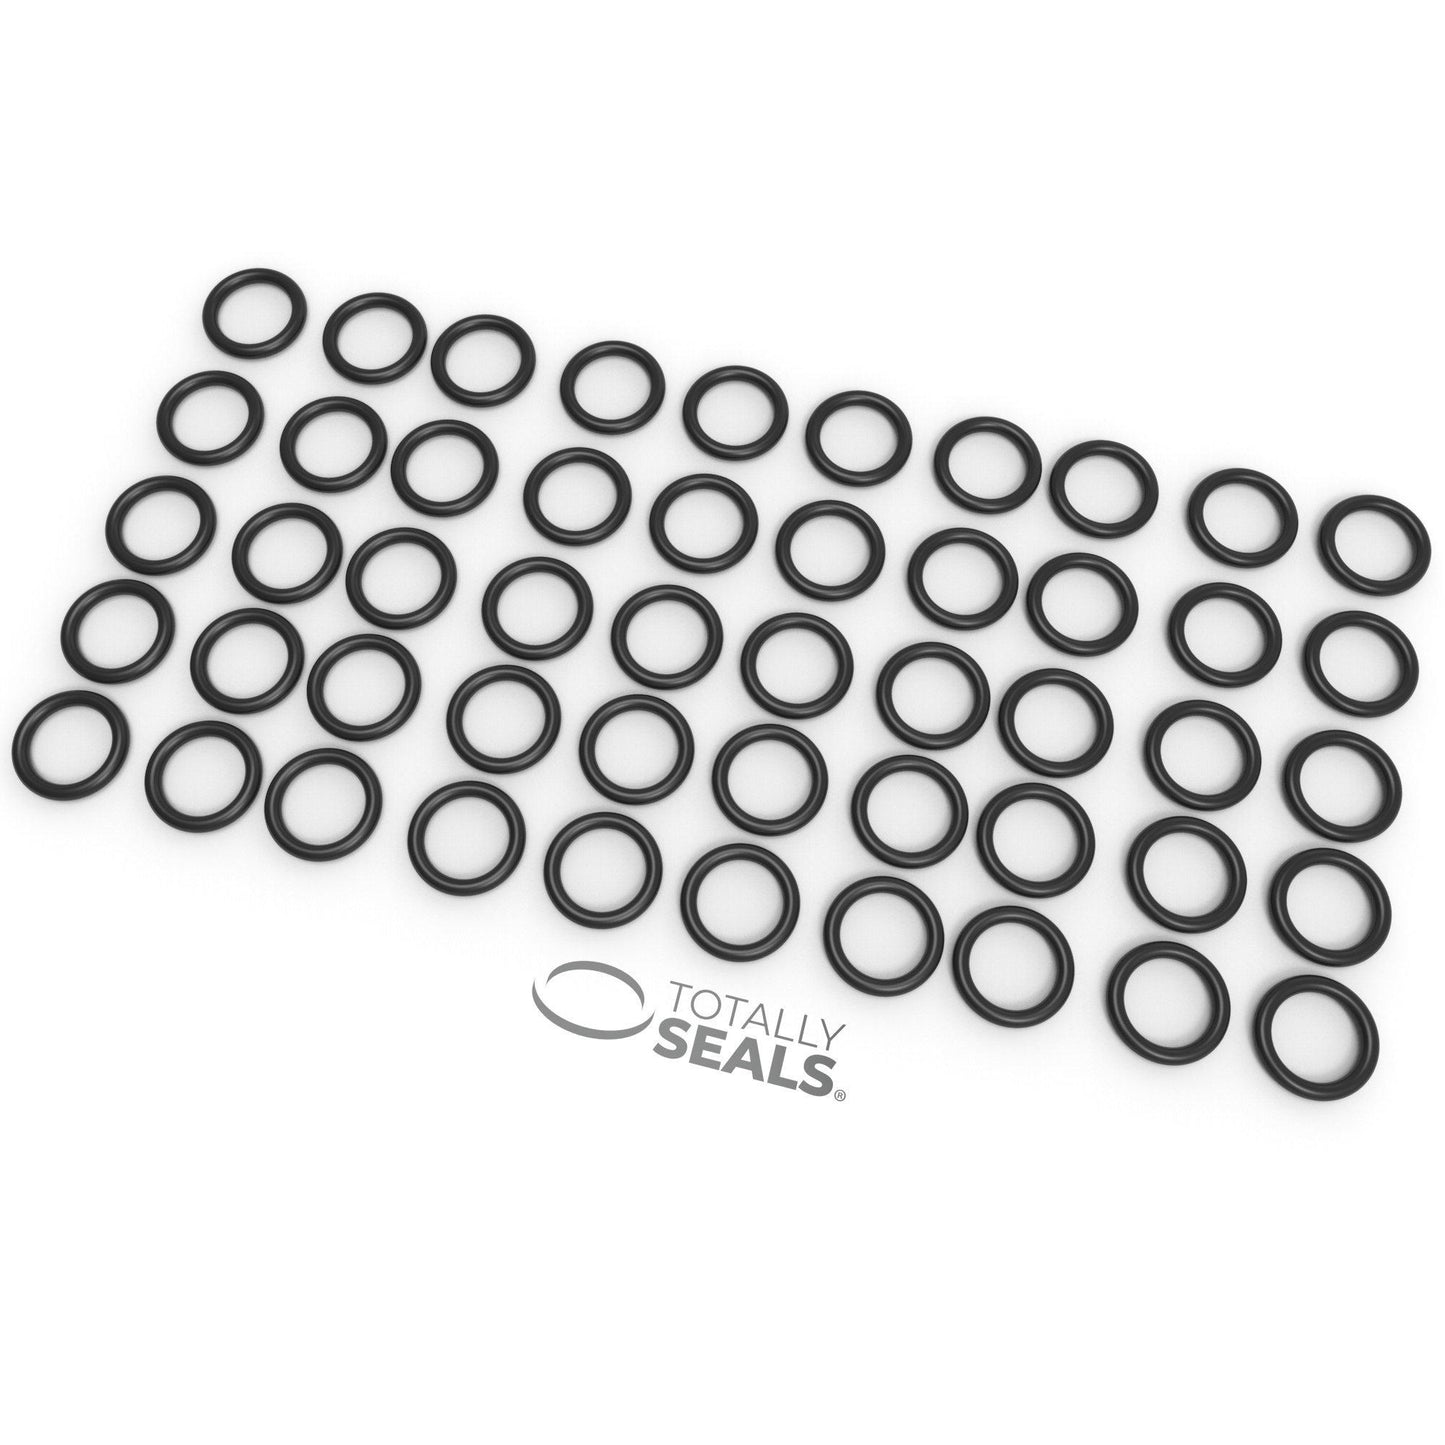 7mm x 1mm (9mm OD) Nitrile O-Rings - Totally Seals®